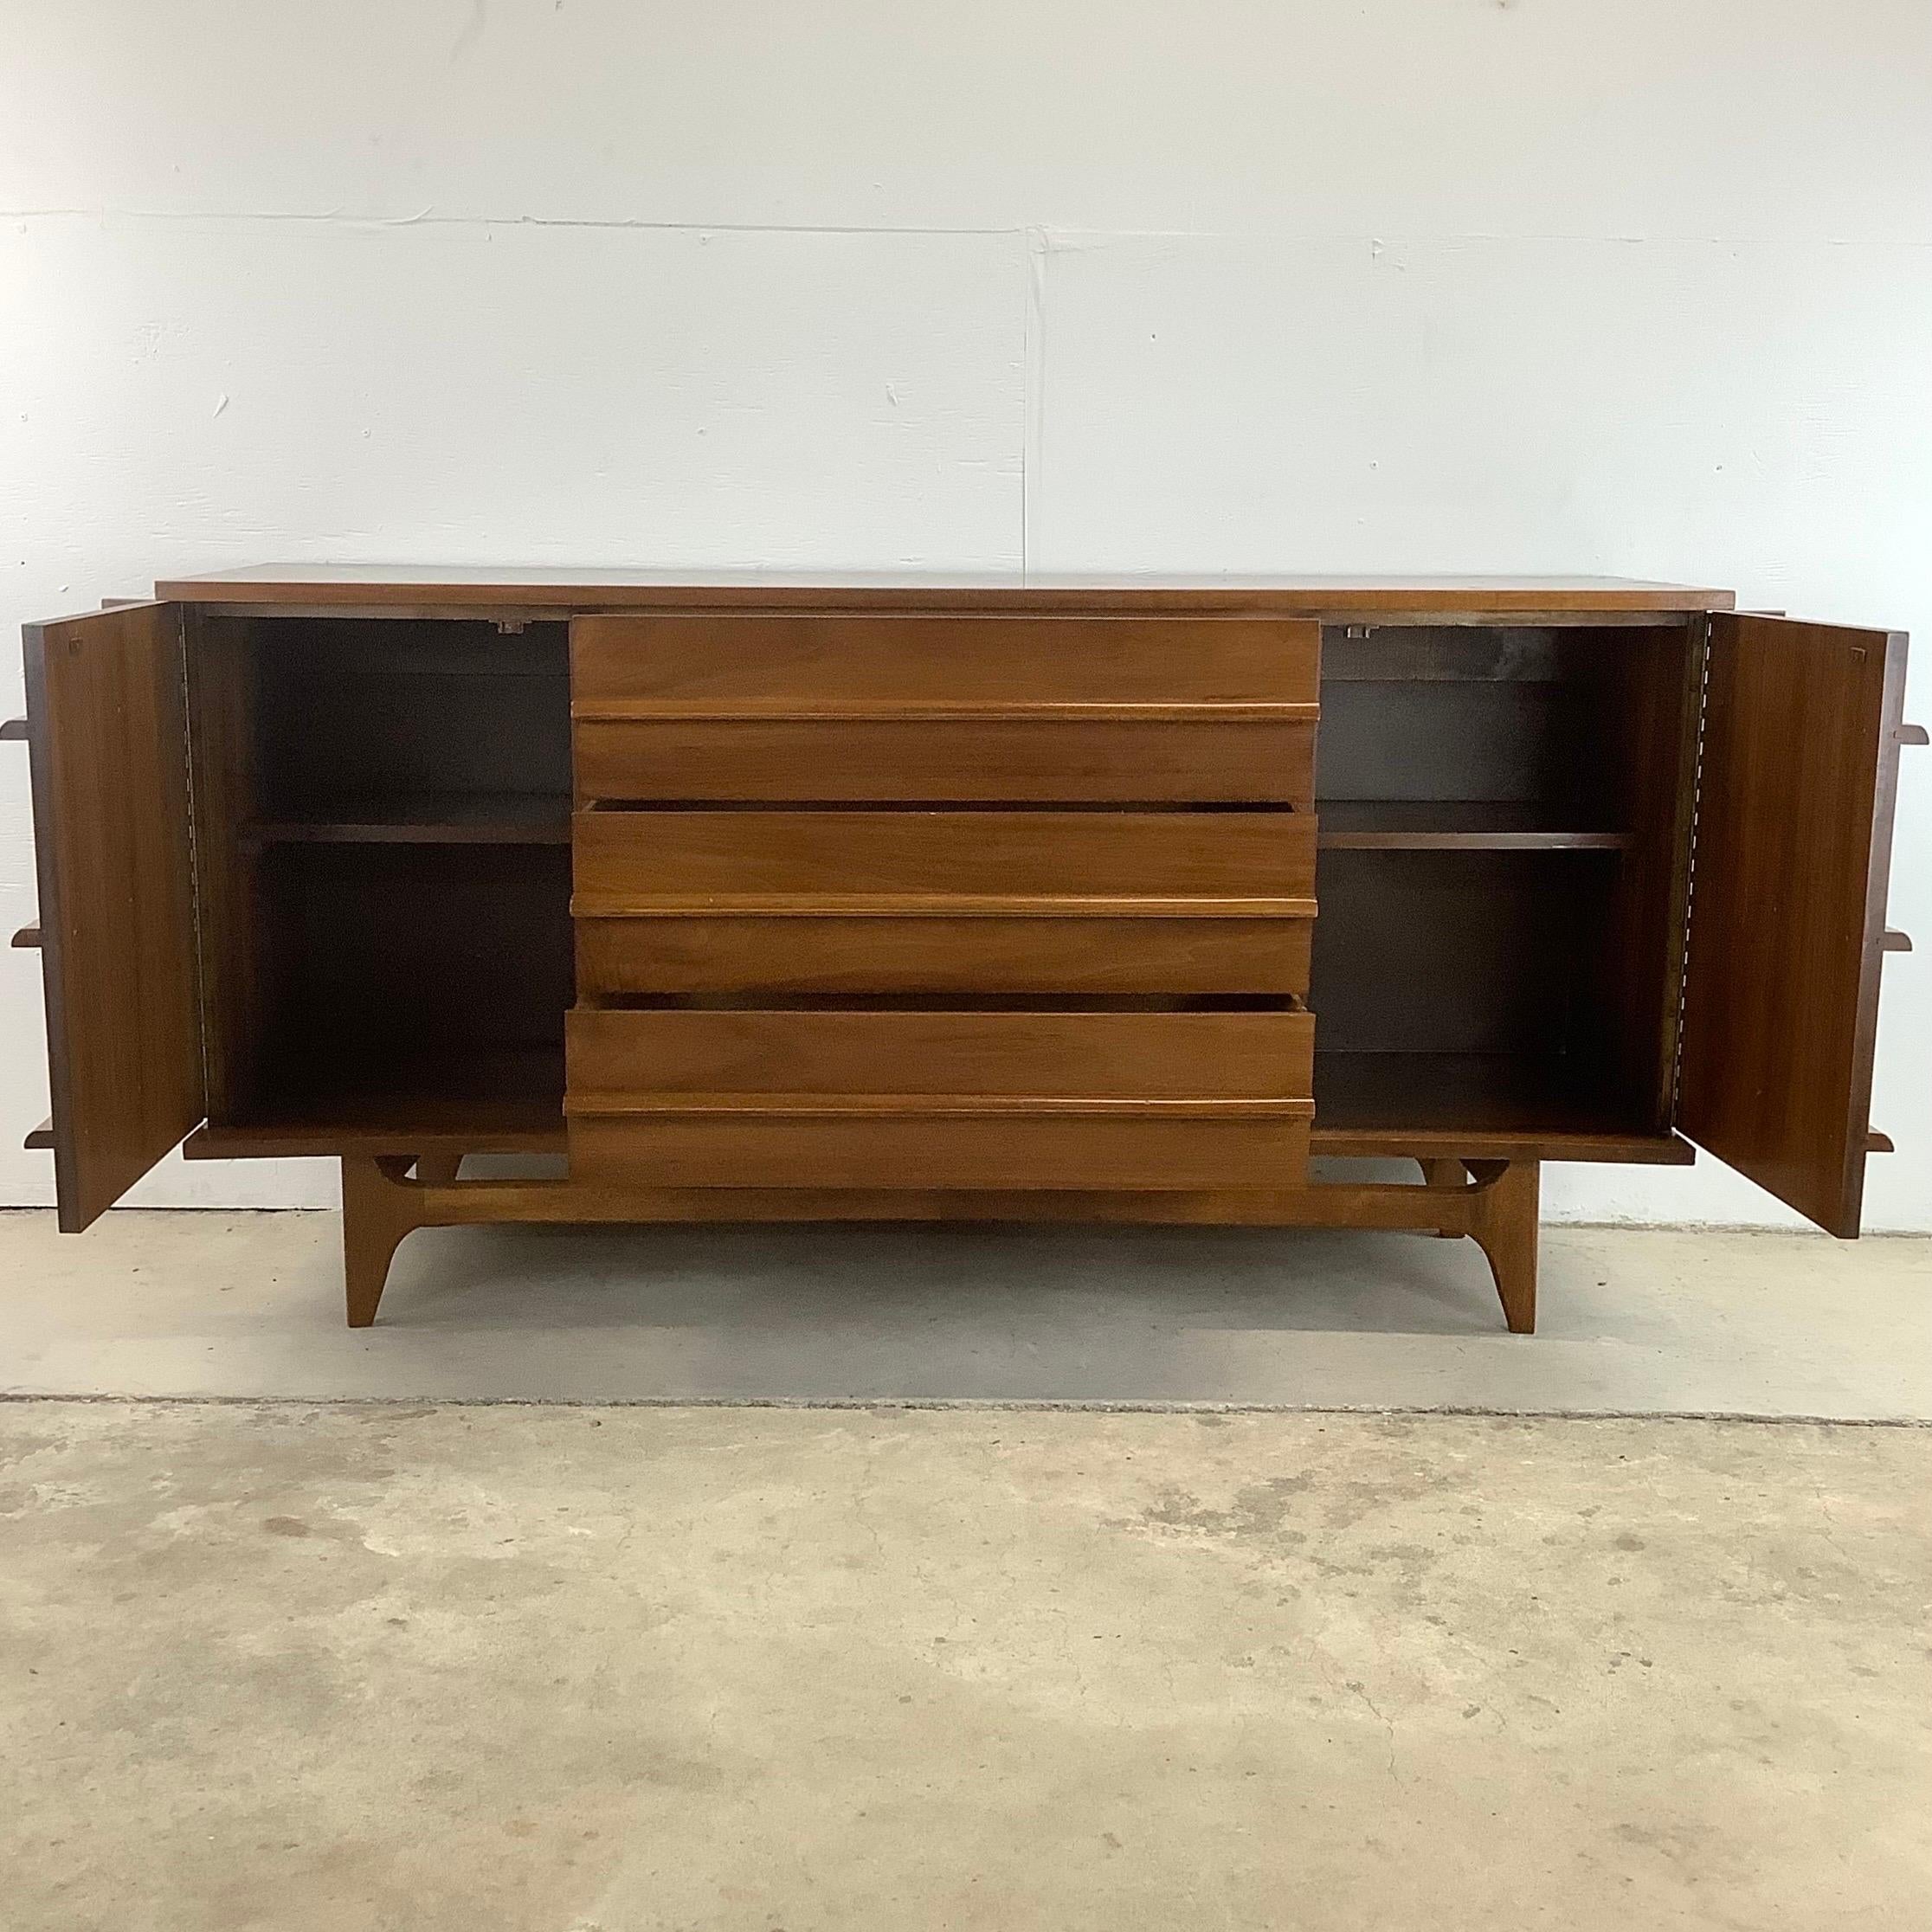 This Young Manufacturing Walnut Bow Front Credenza showcases the timeless appeal of this quality mid-century design, making it a remarkable centerpiece in any room.

Crafted with exceptional artistry, this credenza features a distinctive curved bow